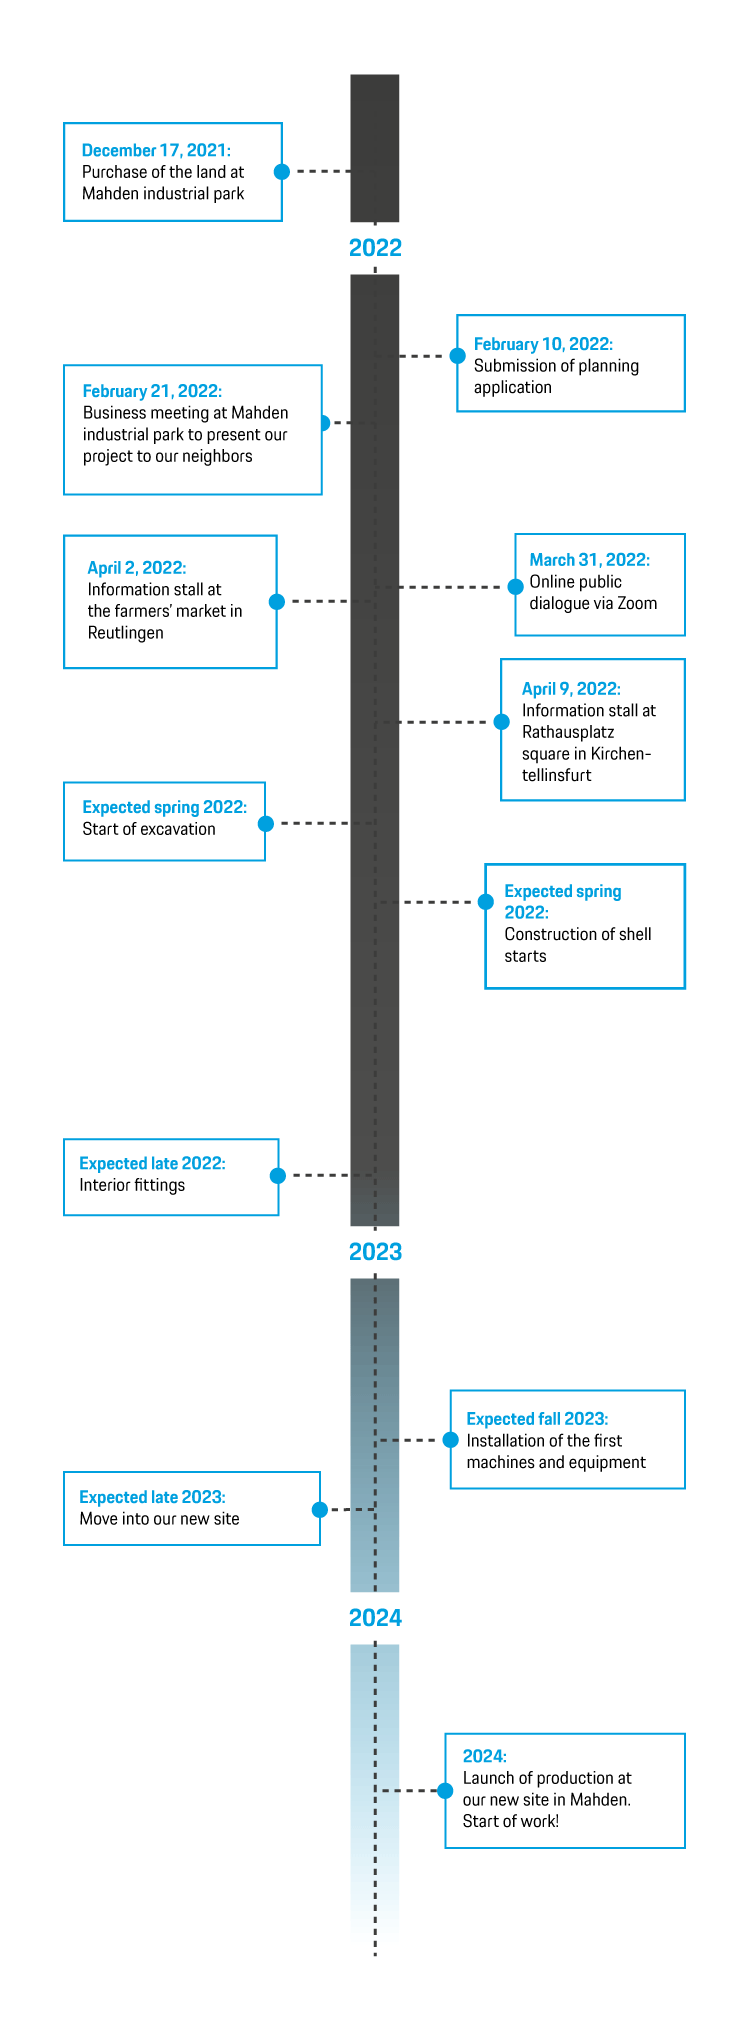 Timeline of the planning steps from 2022 to 2024